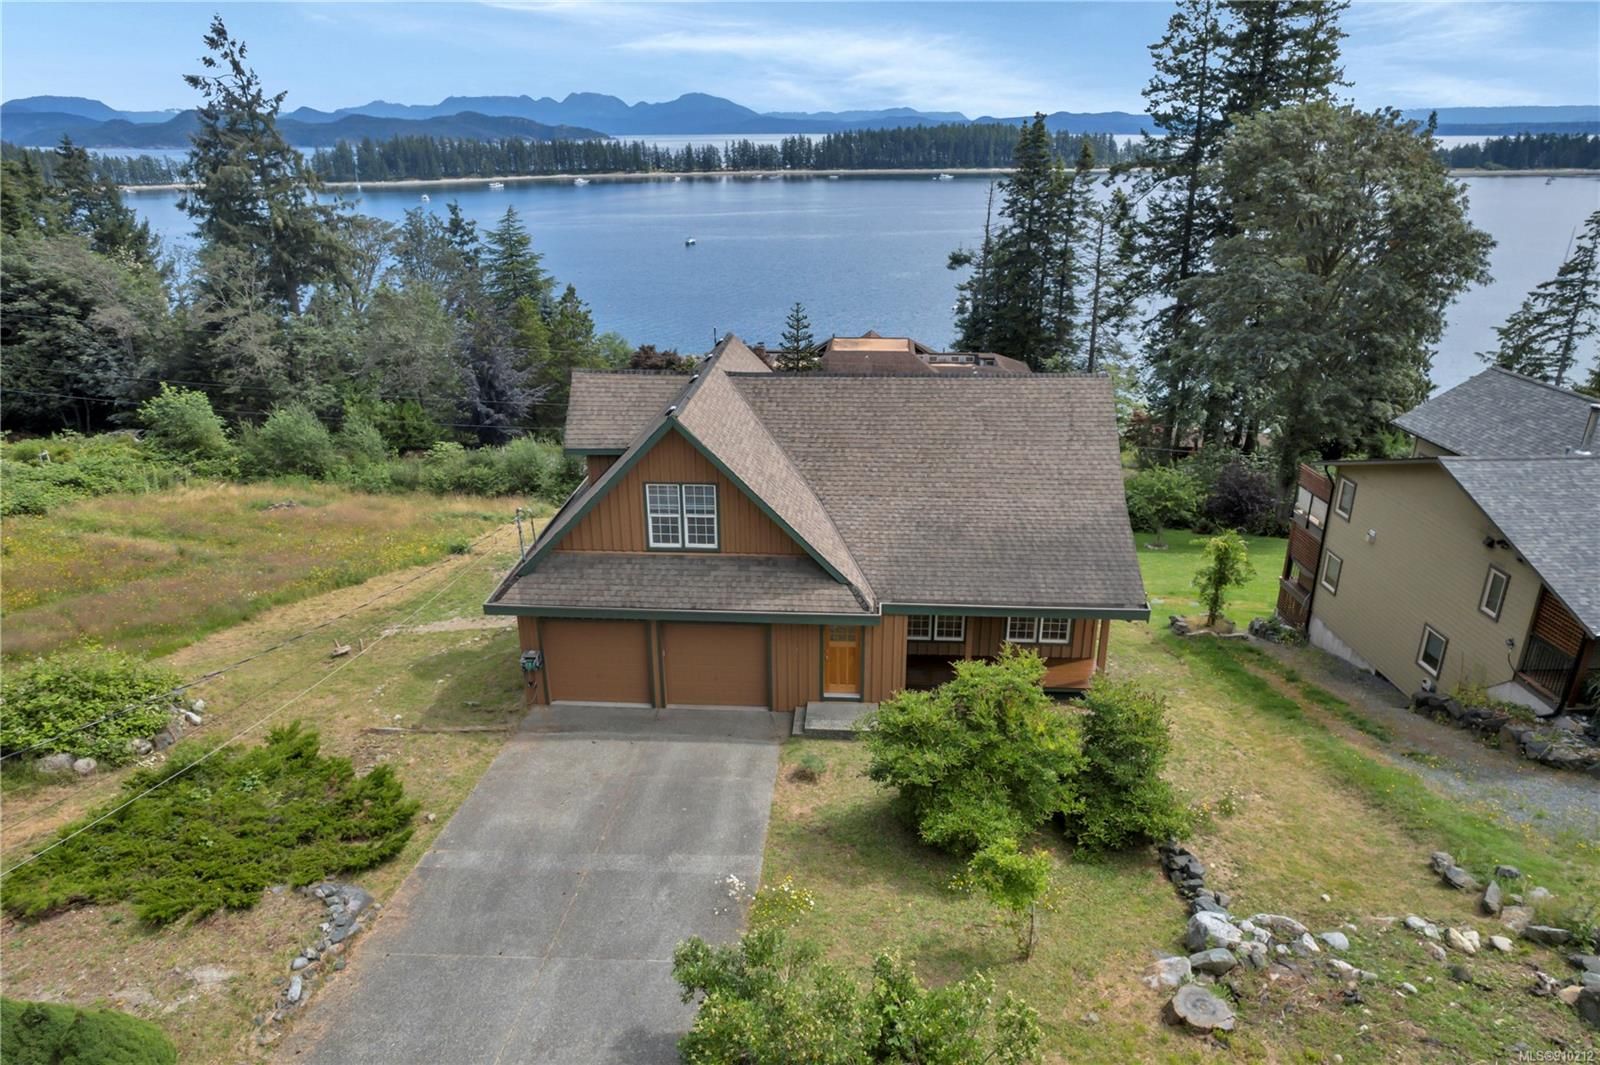 Heriot Bay oceanview home featuring panoramic views across Rebecca Spit Provincial Park!